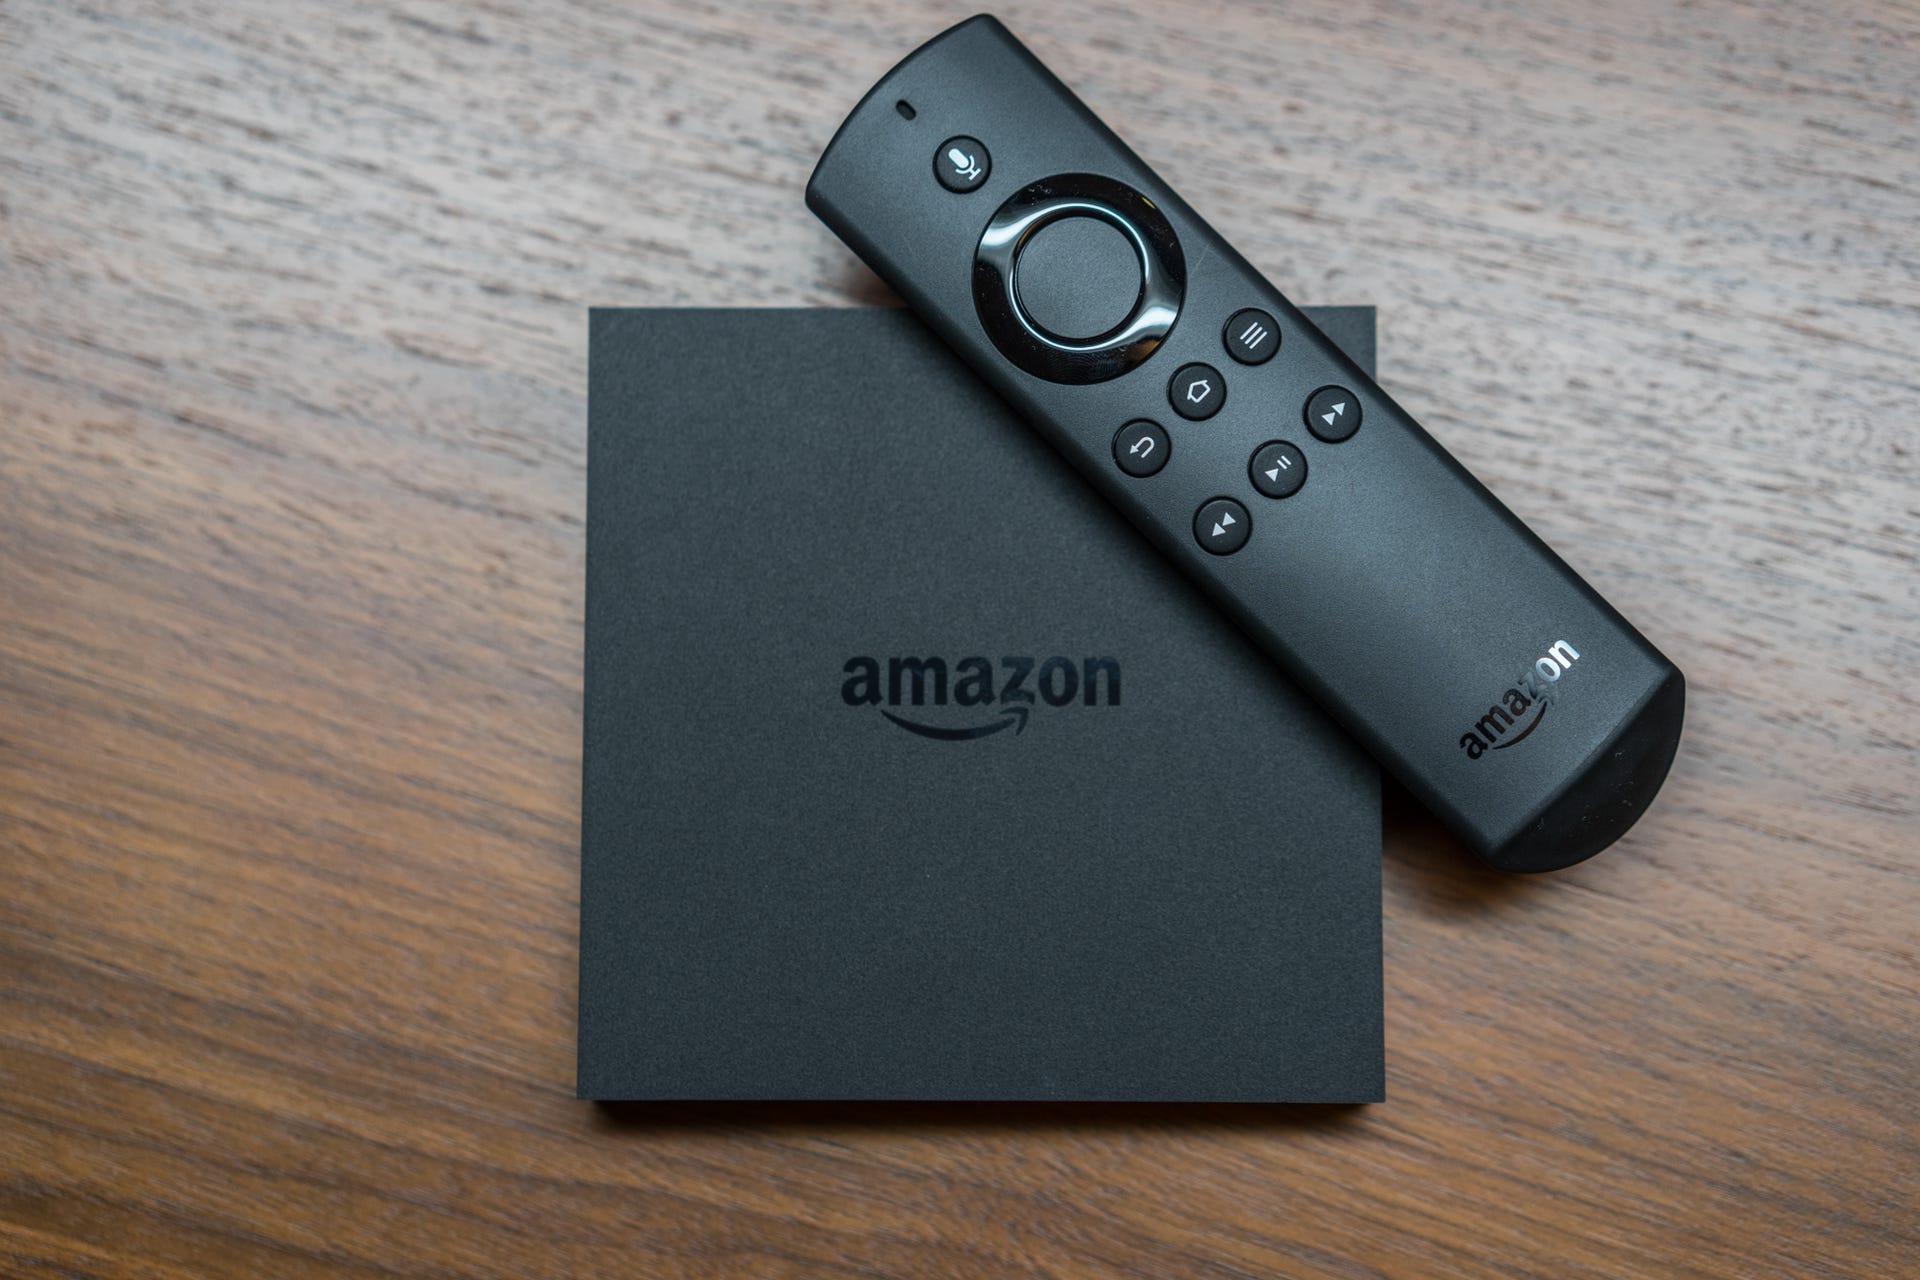 The Amazon Fire TV can pull in Internet video compressed with HEVC/H.265 technology, but Amazon is also backing development of a competing technology.